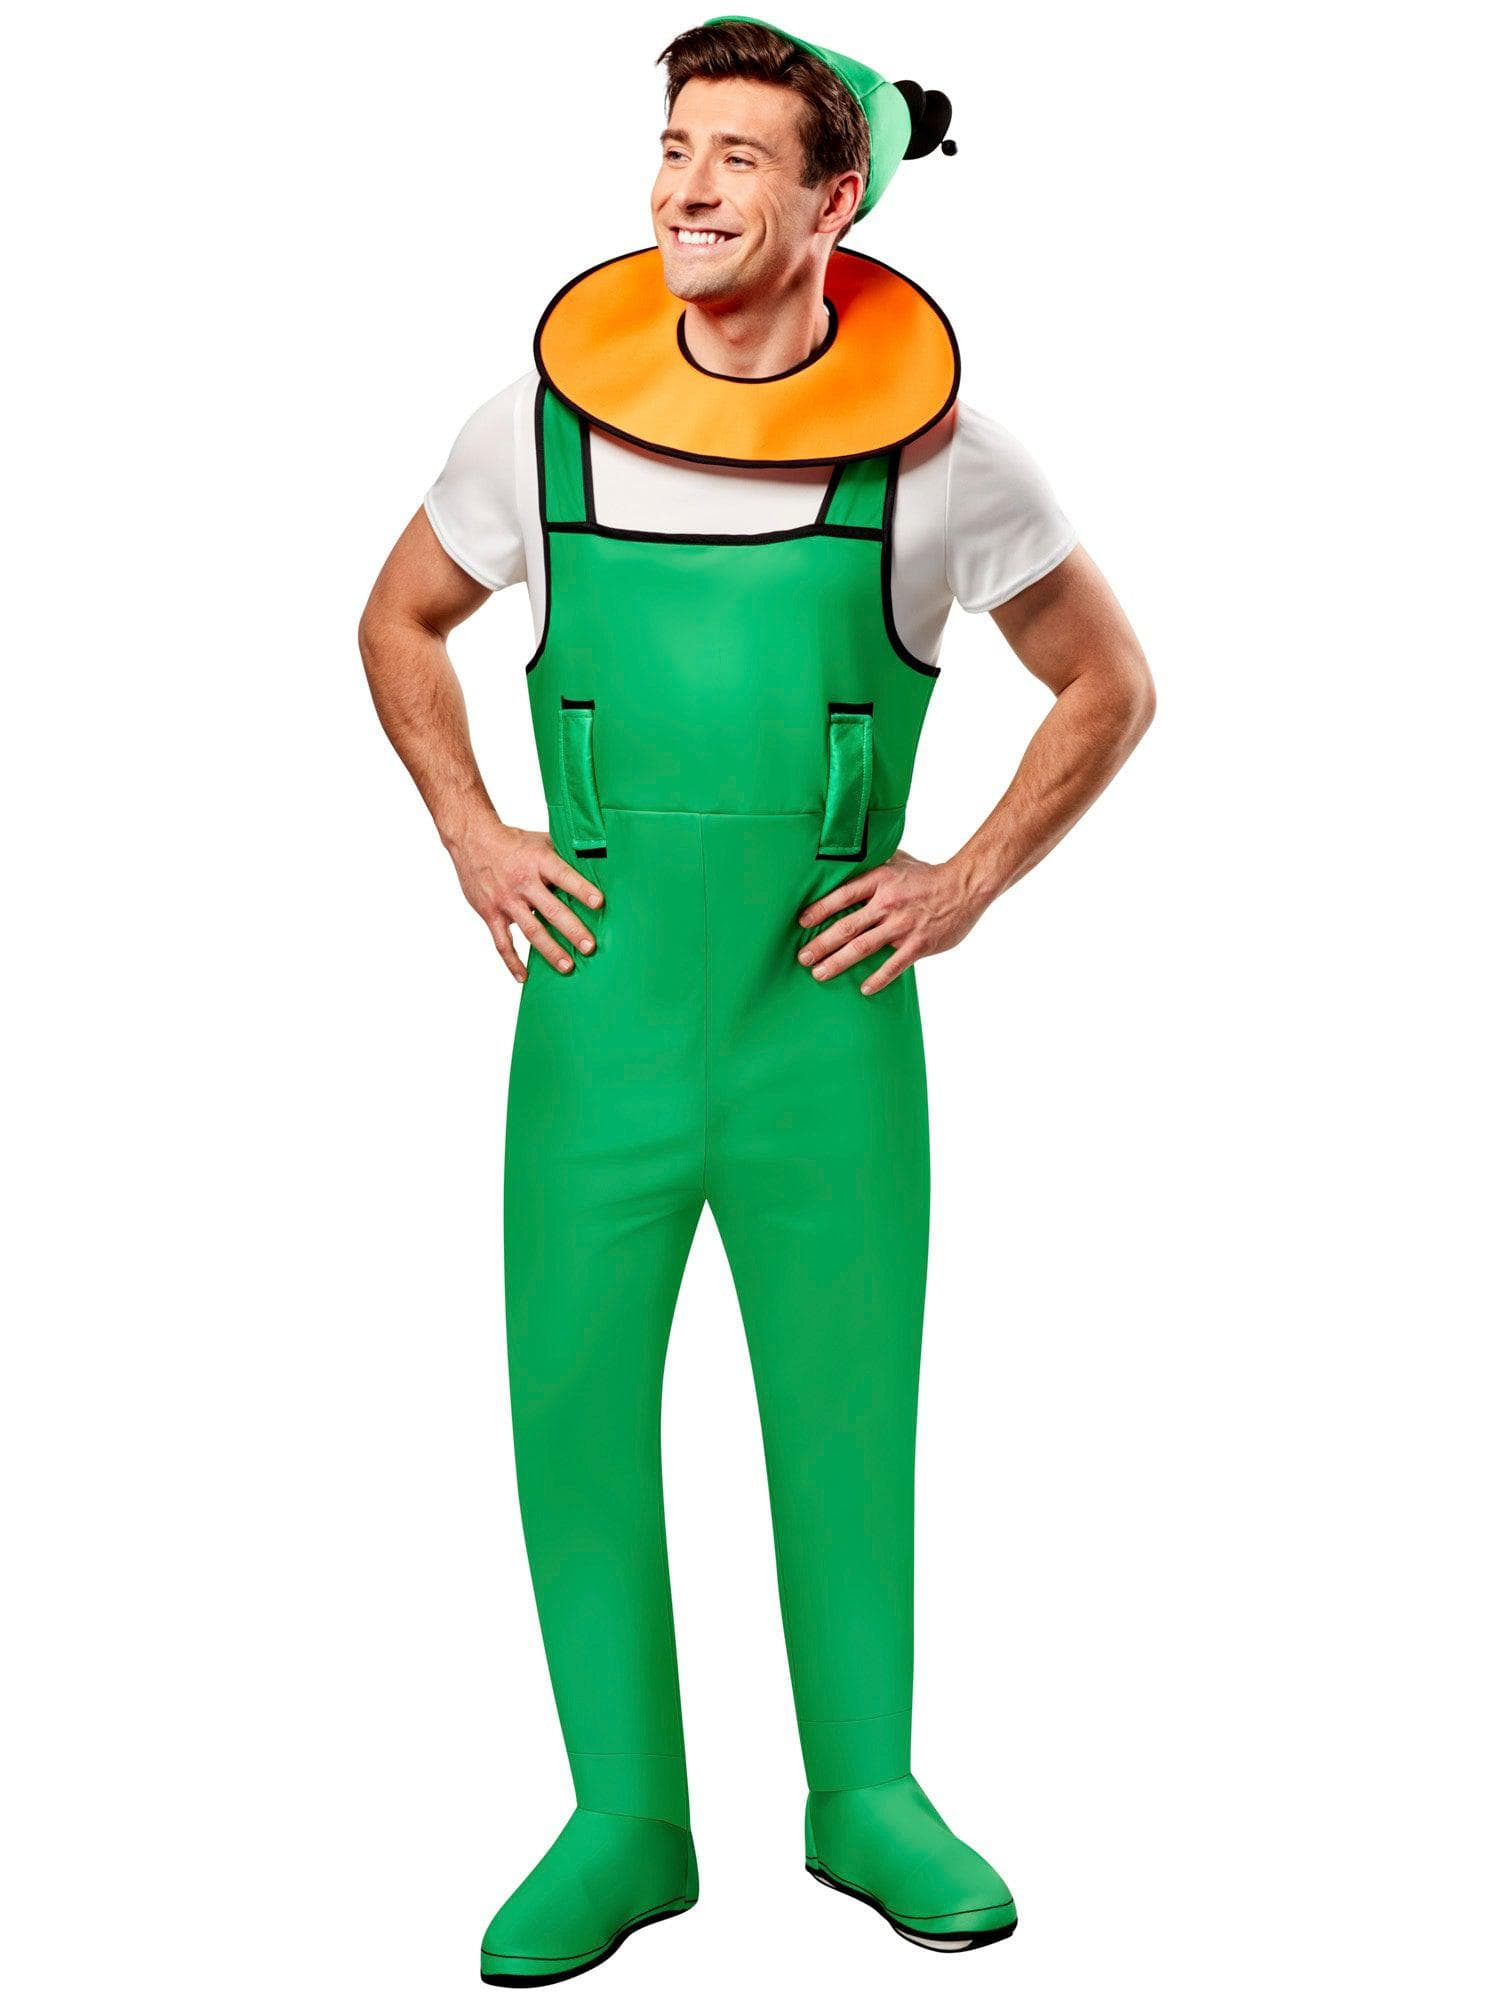 The Jetsons Elroy Jetson Adult Costume - costumes.com